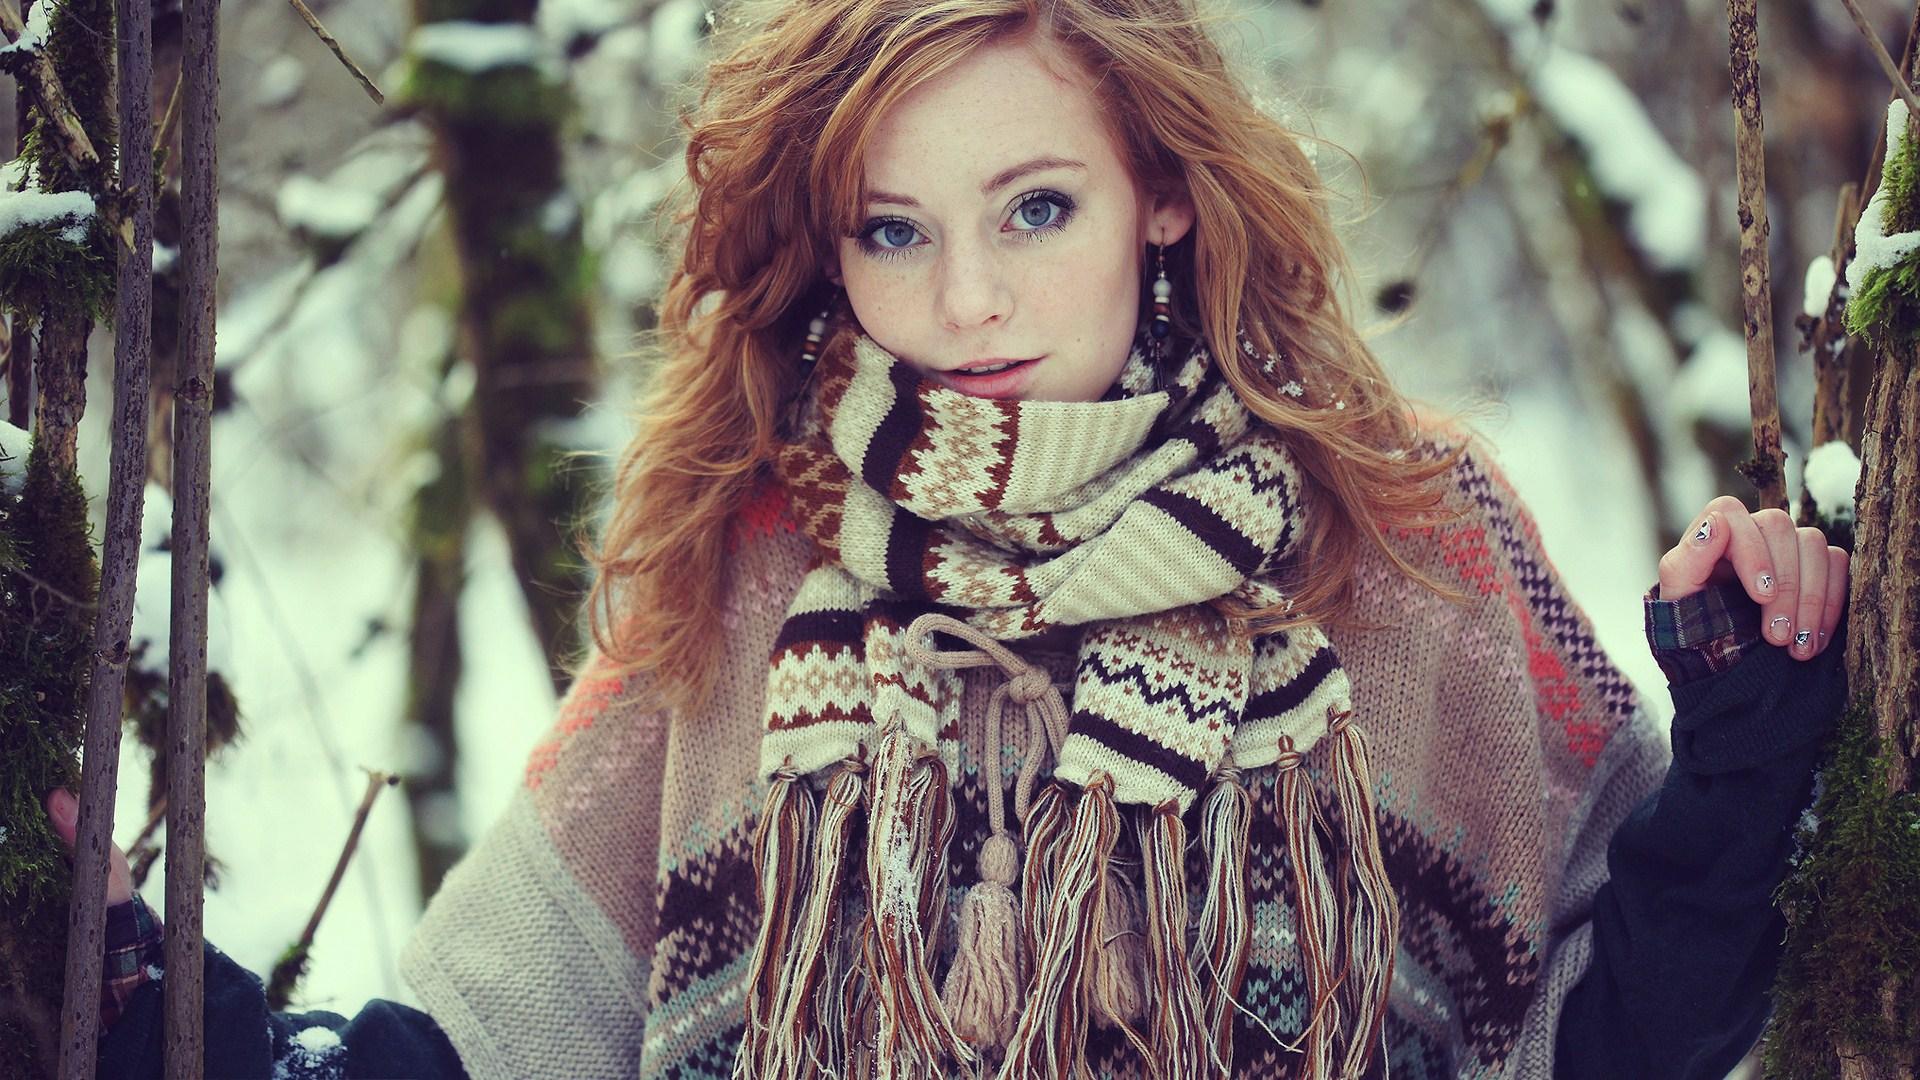 Winter Girl Wallpaper Image Photo Picture Background